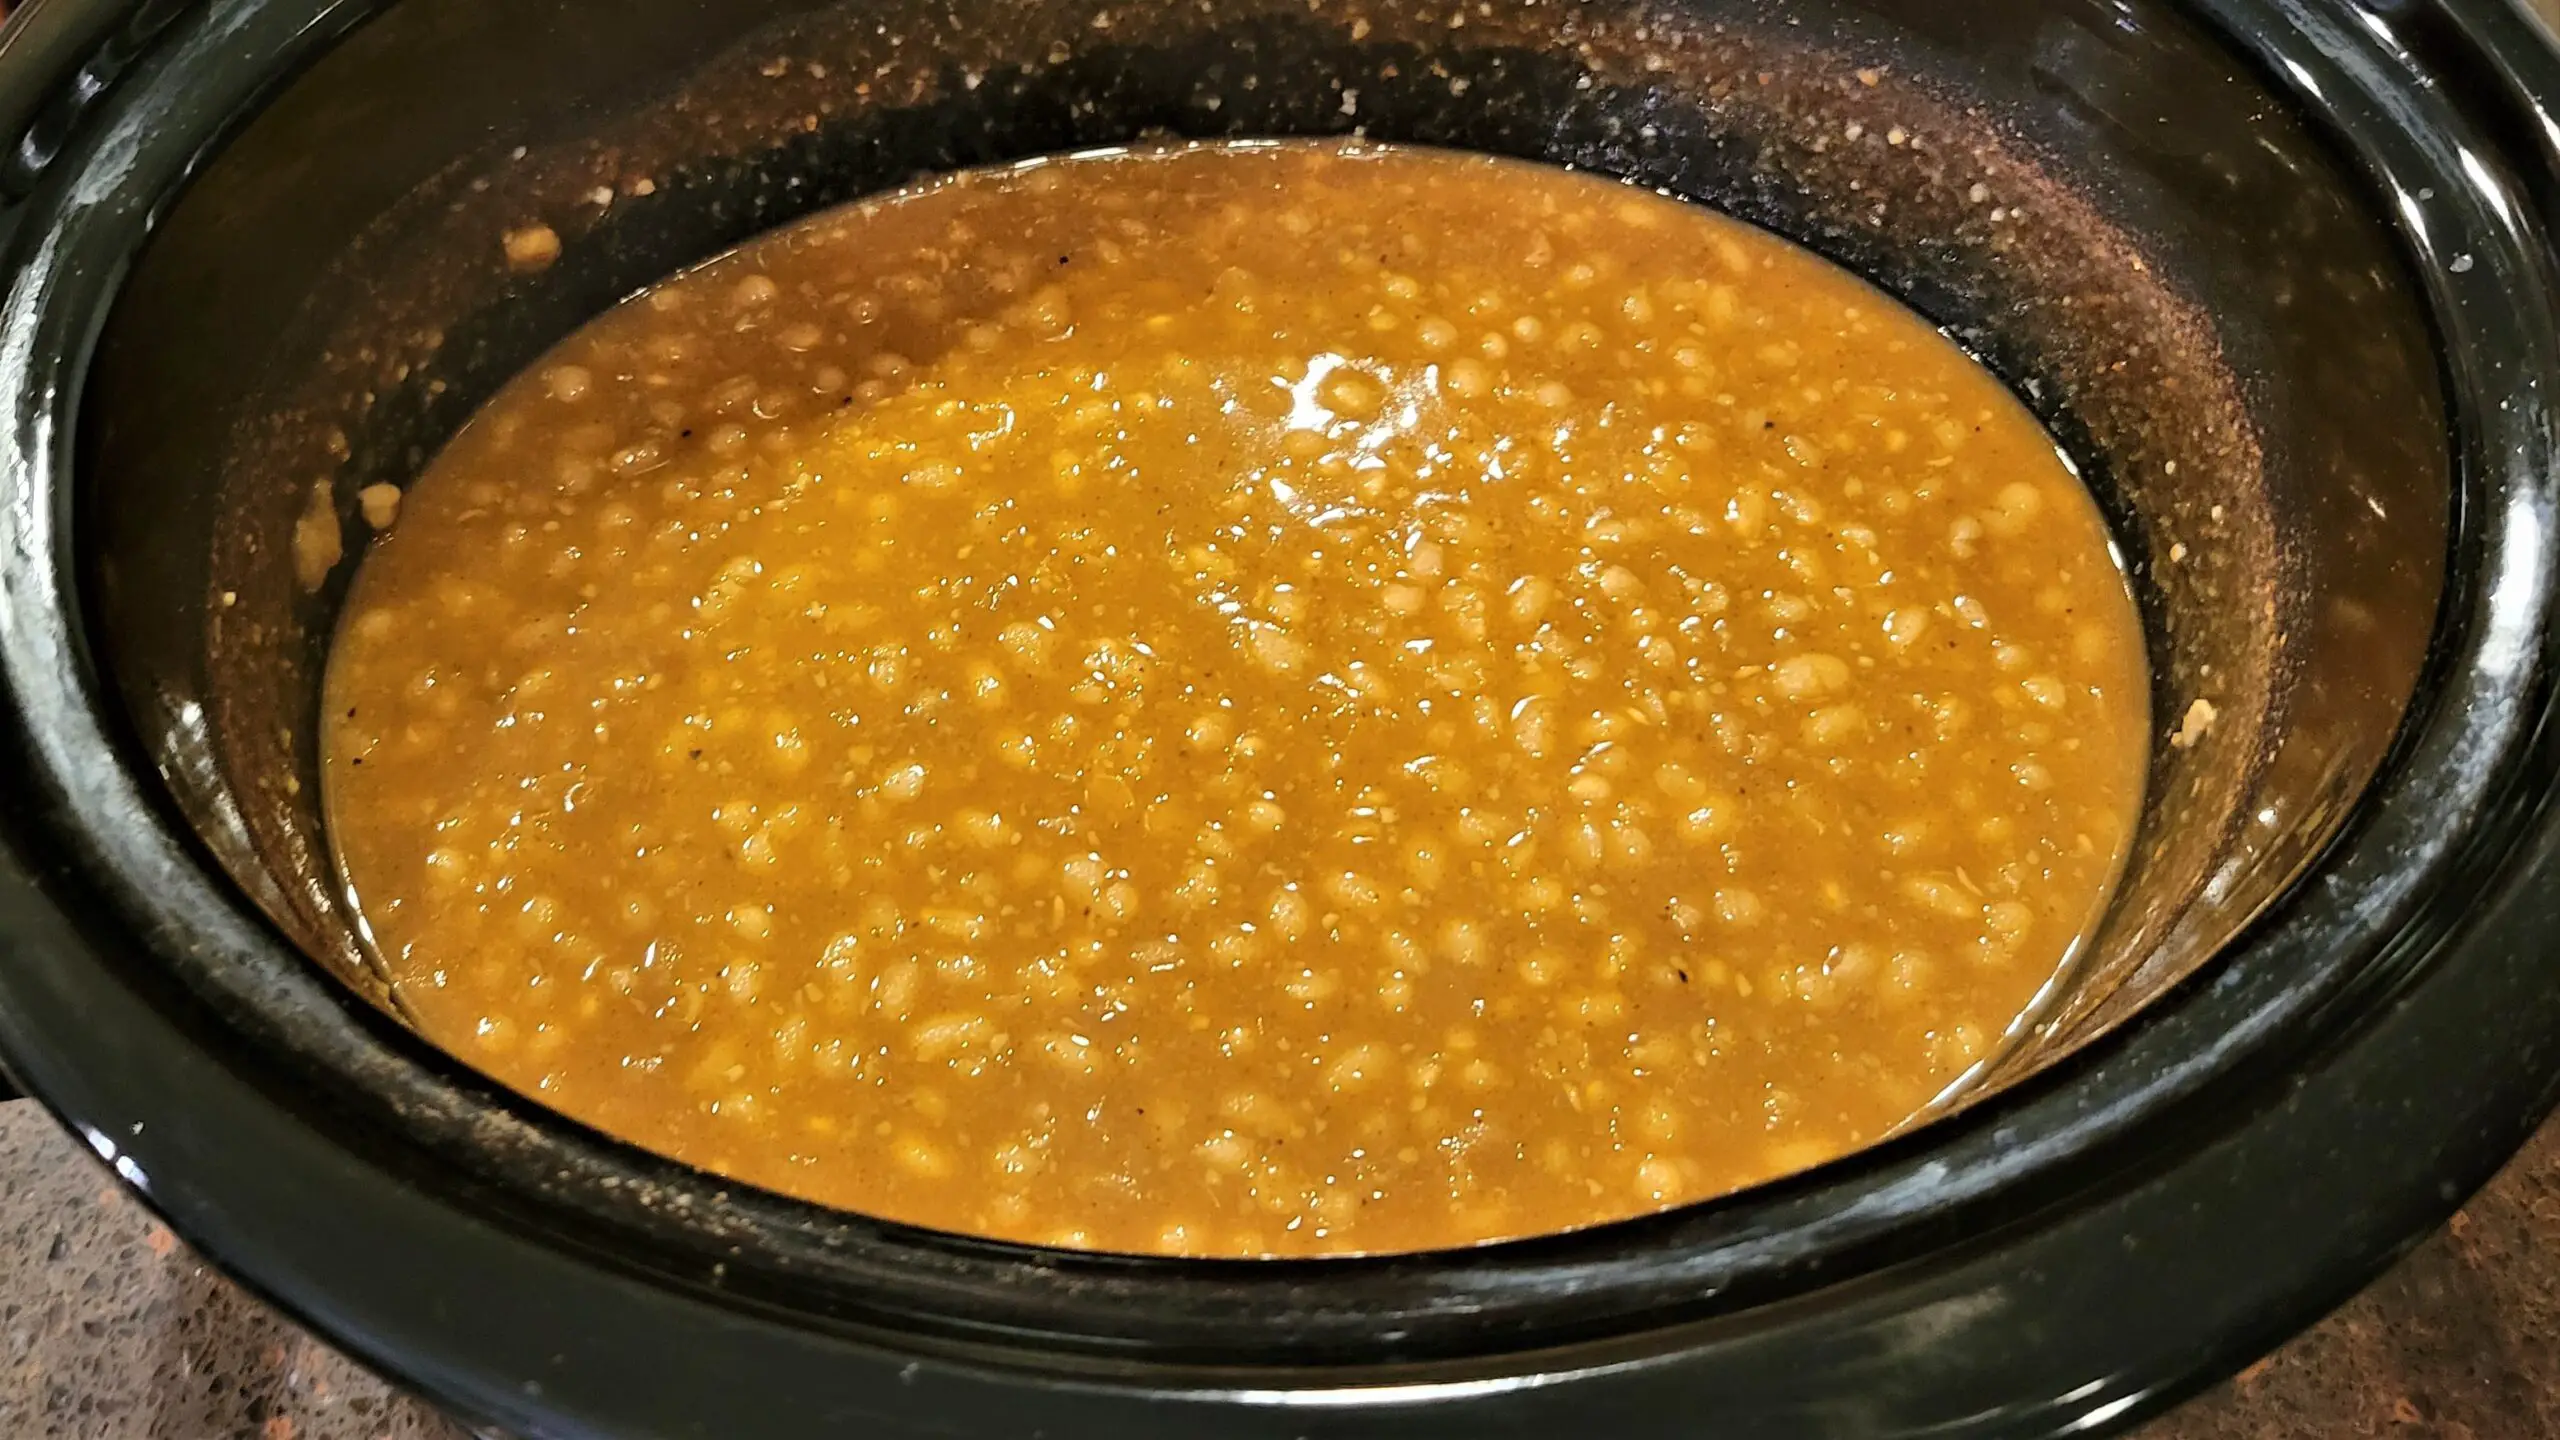 Crockpot navy beans - Dining in with Danielle